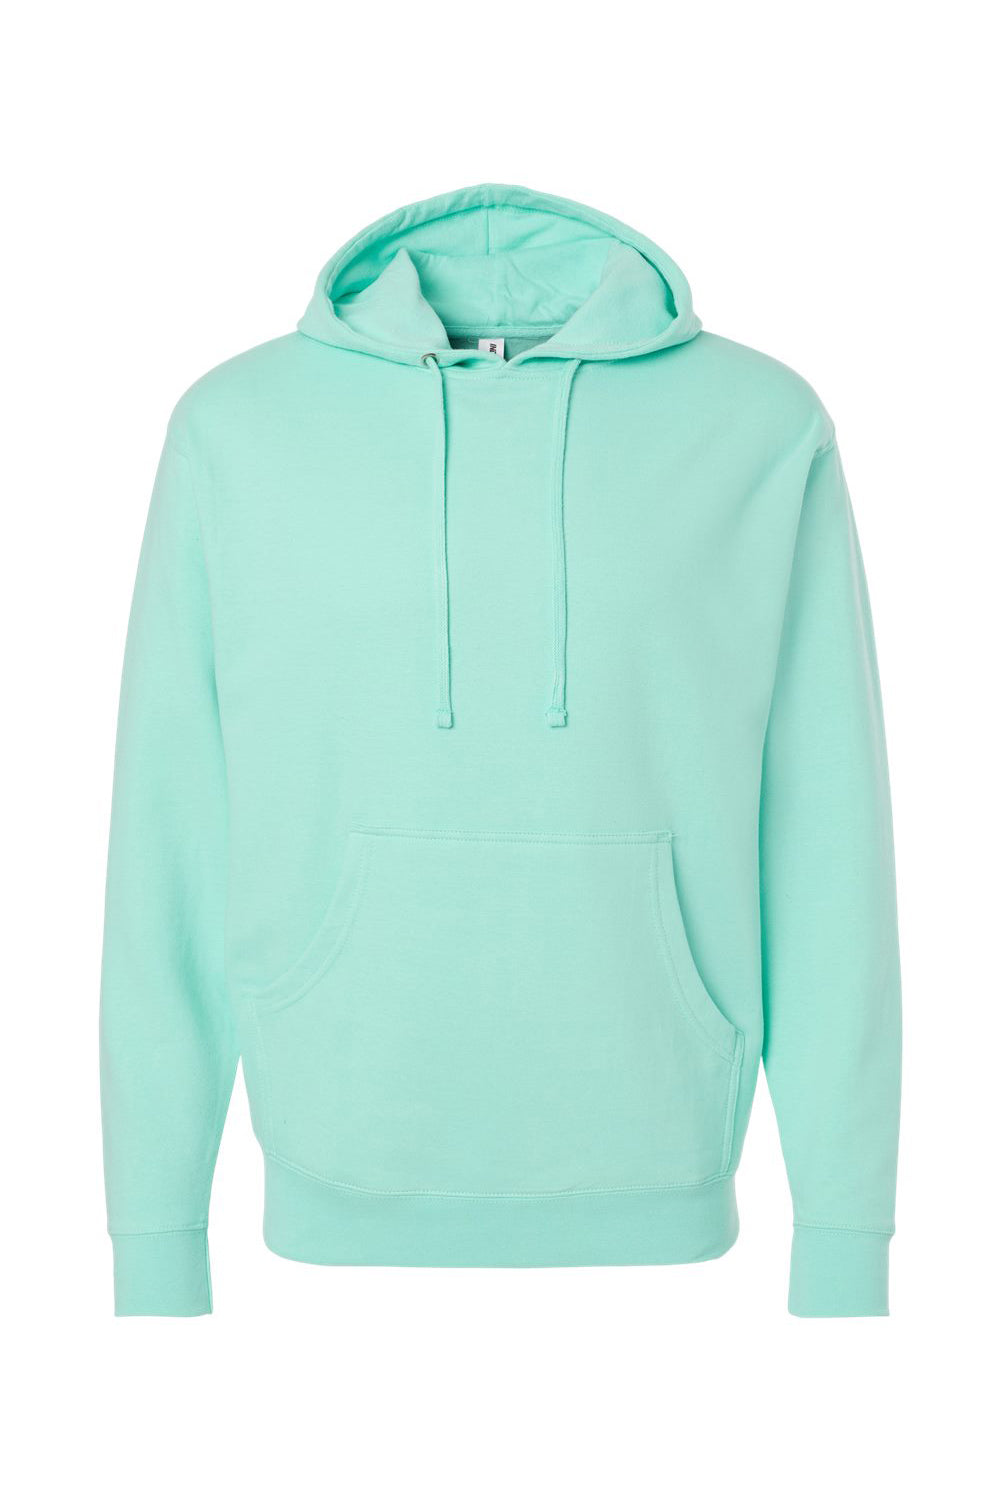 Independent Trading Co. SS4500 Mens Hooded Sweatshirt Hoodie Mint Green Flat Front